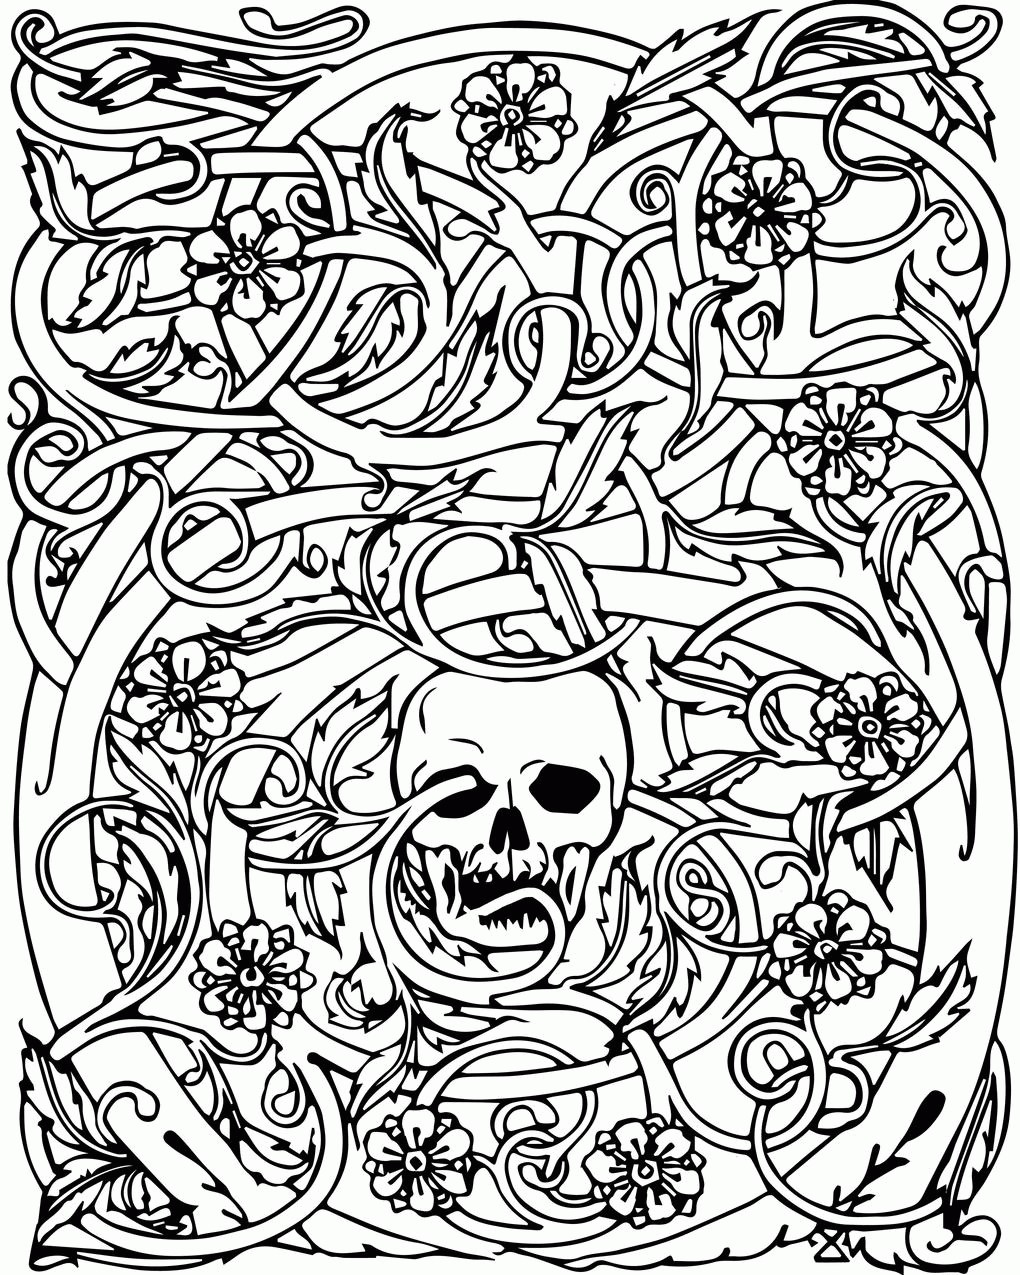 Tangled Skull | halloween coloring pages for adult | free halloween coloring pages for adult